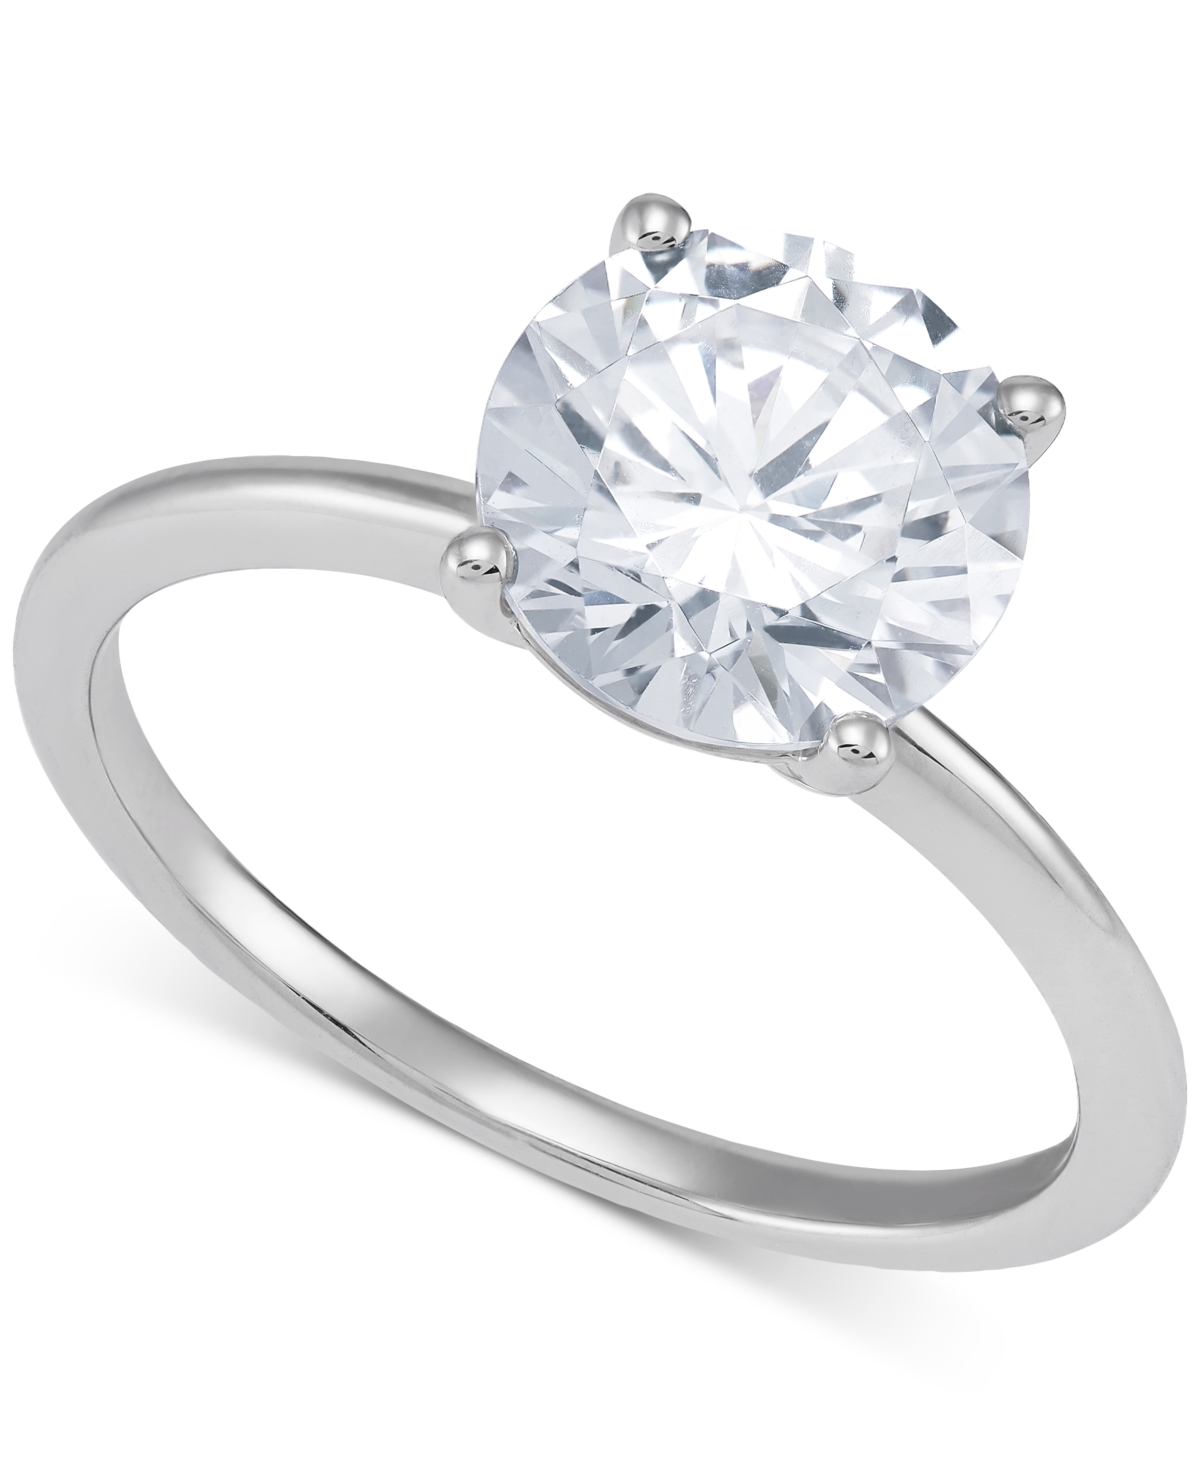 Grown With Love Igi Certified Lab Grown Diamond Solitaire Engagement Ring (2 ct. t.w.) in 14k White Gold